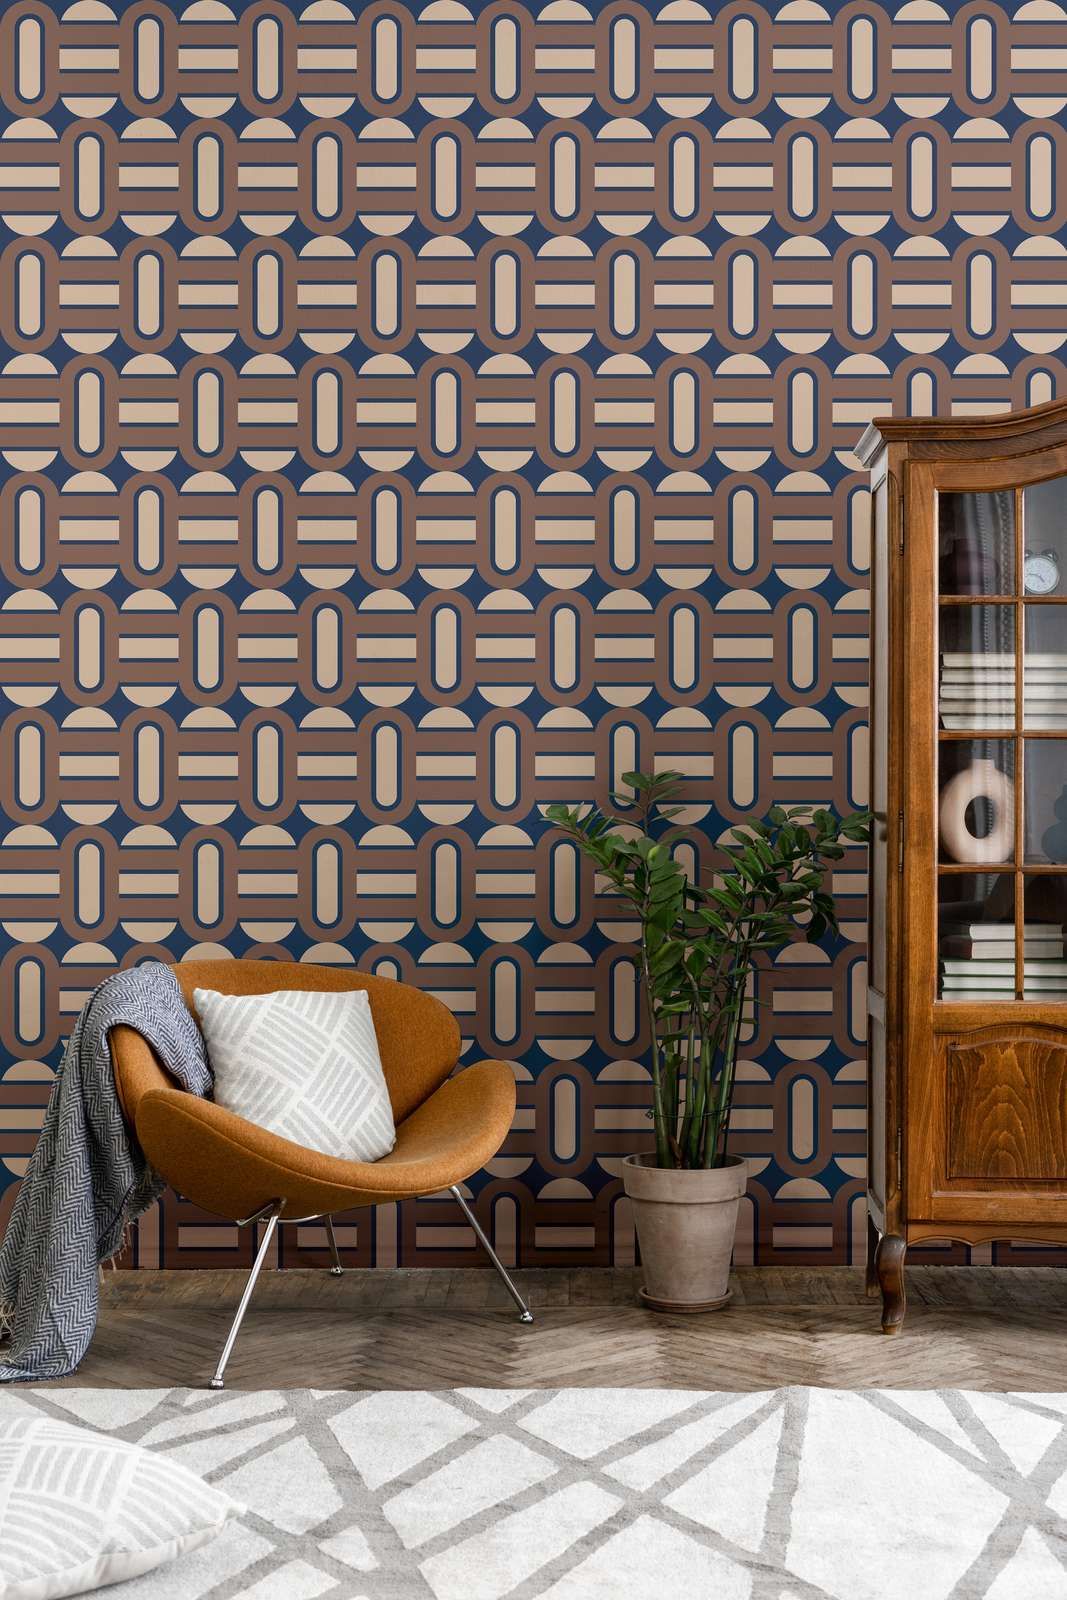             Retro style wallpaper decorated with ovals and bars - blue, brown, beige
        